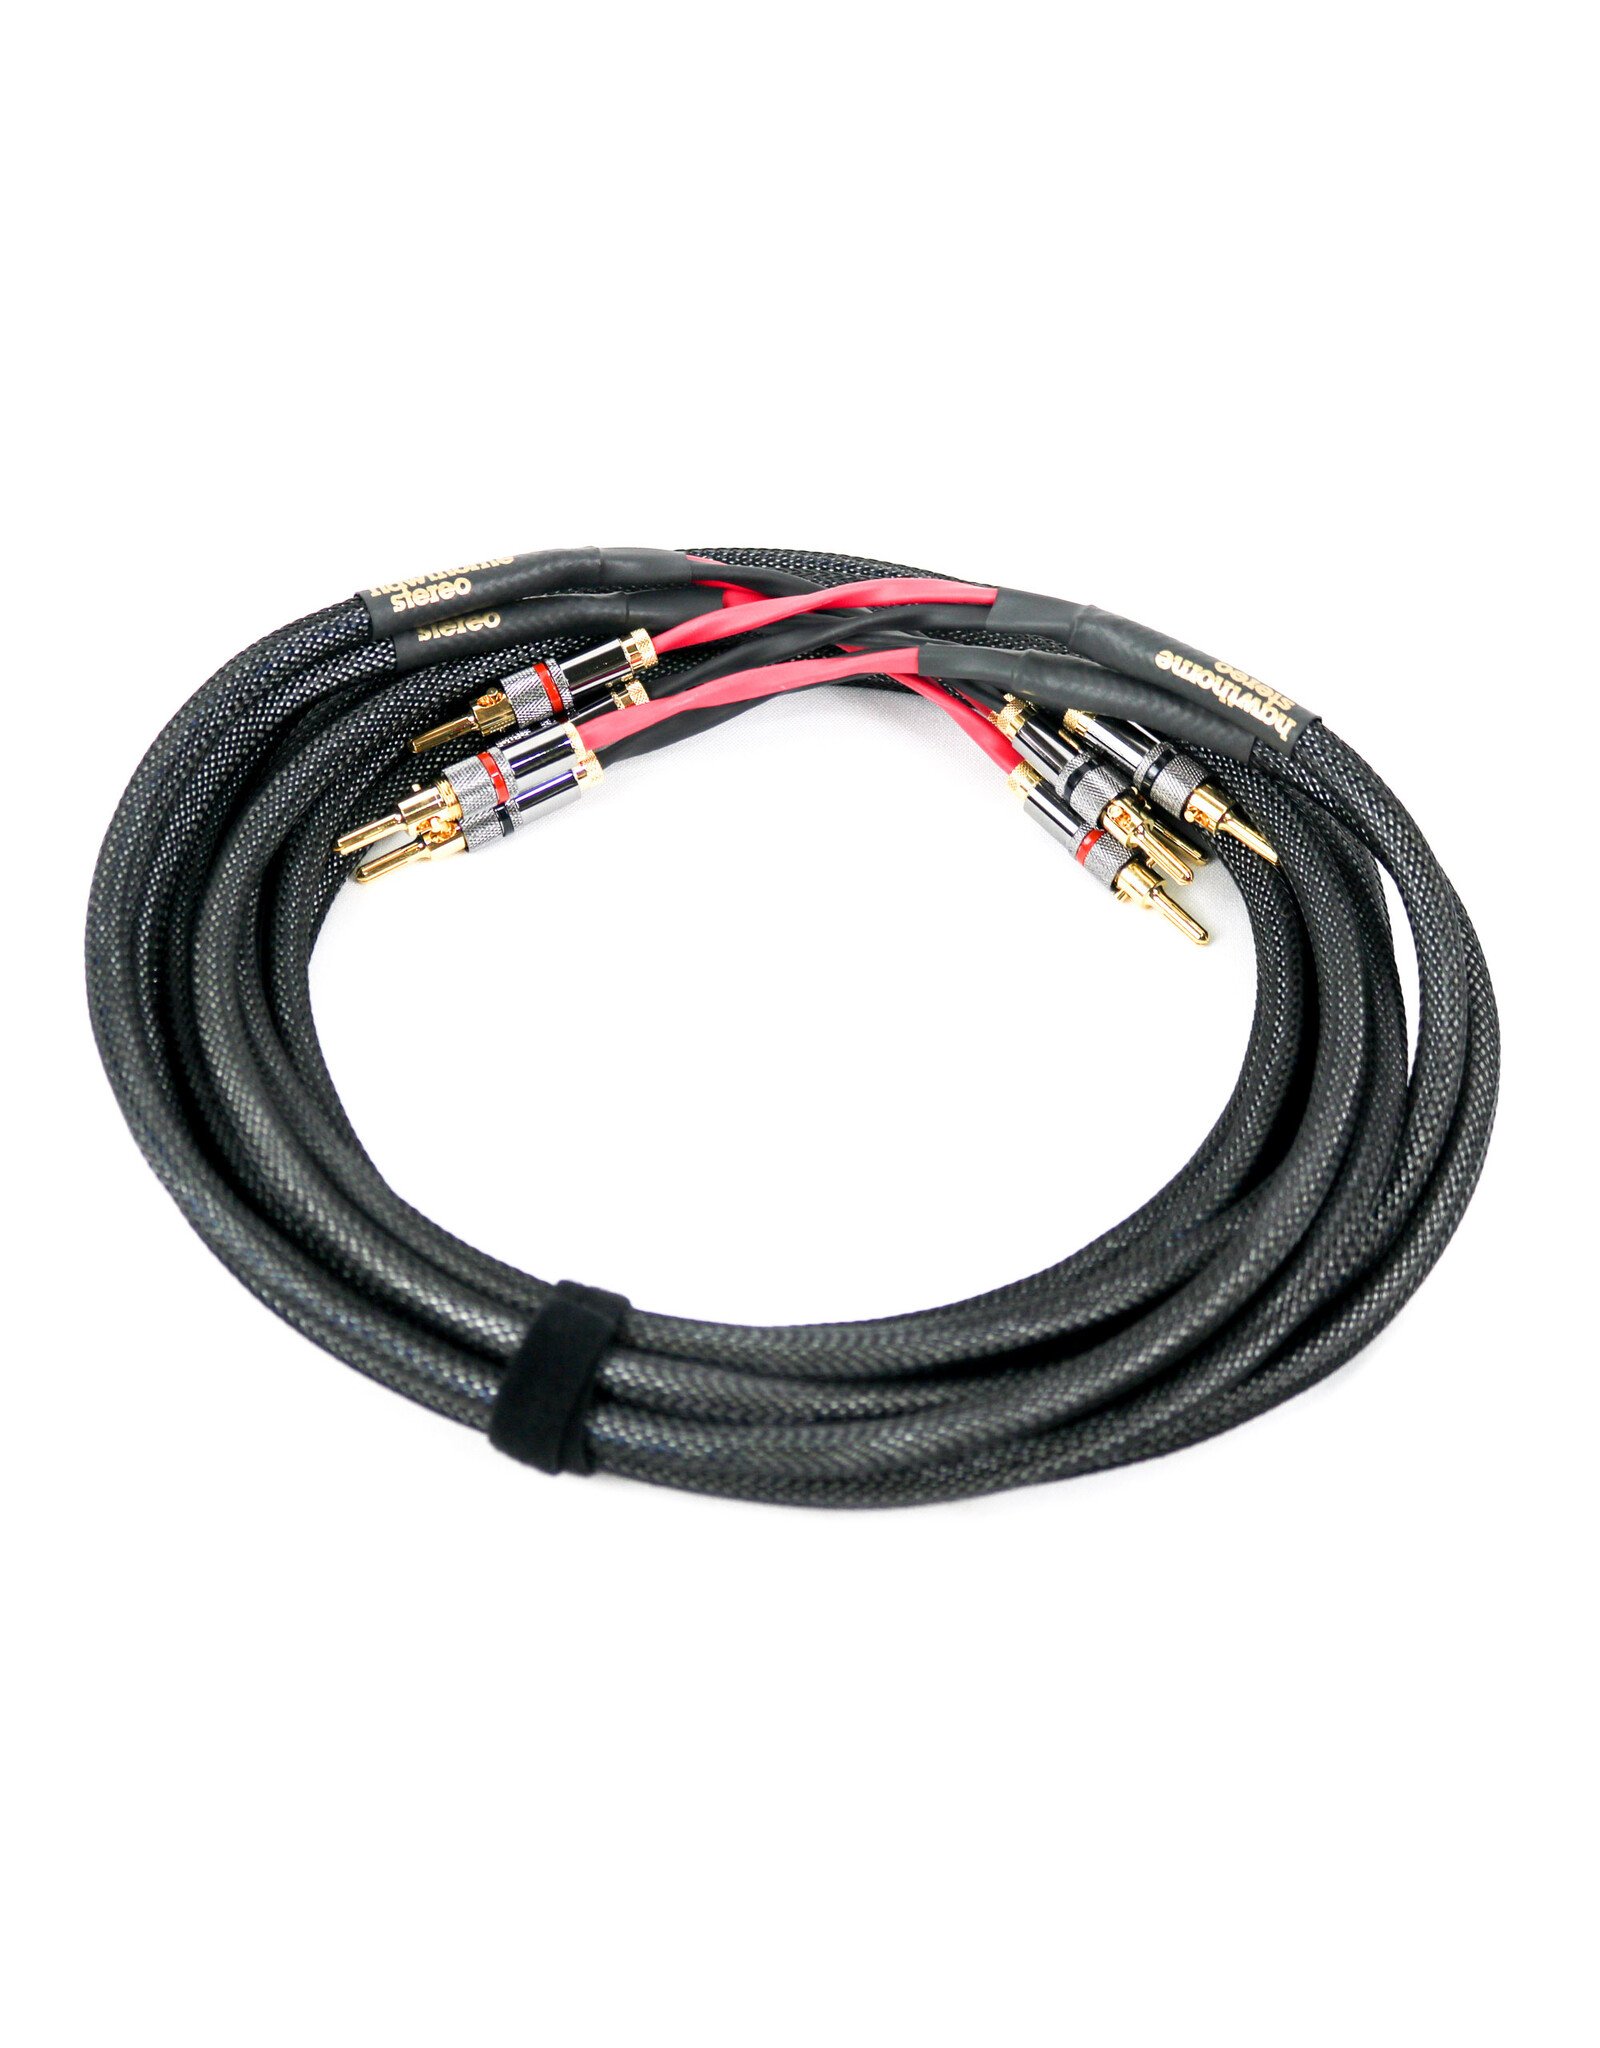 Blue Jeans Cable Blue Jeans X Hawthorne Stereo Speaker Cables "Best"